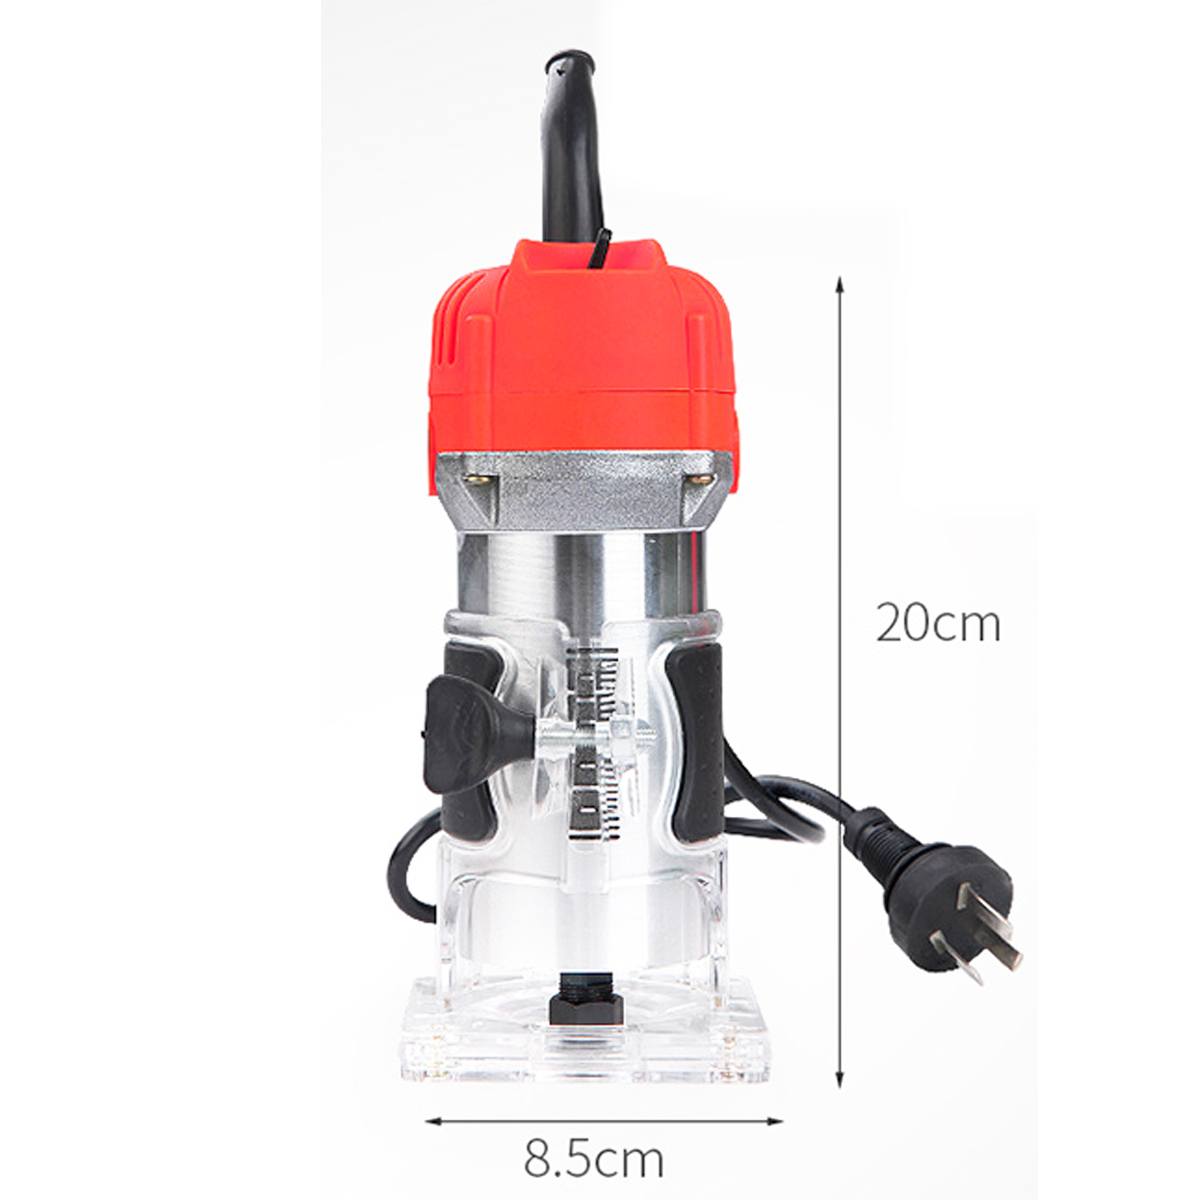 Raitooltrade-220V-680W-30000RPM-Wood-Corded-Electric-Hand-Trimmer-DIY-Tool-Router-635MM-1270211-10